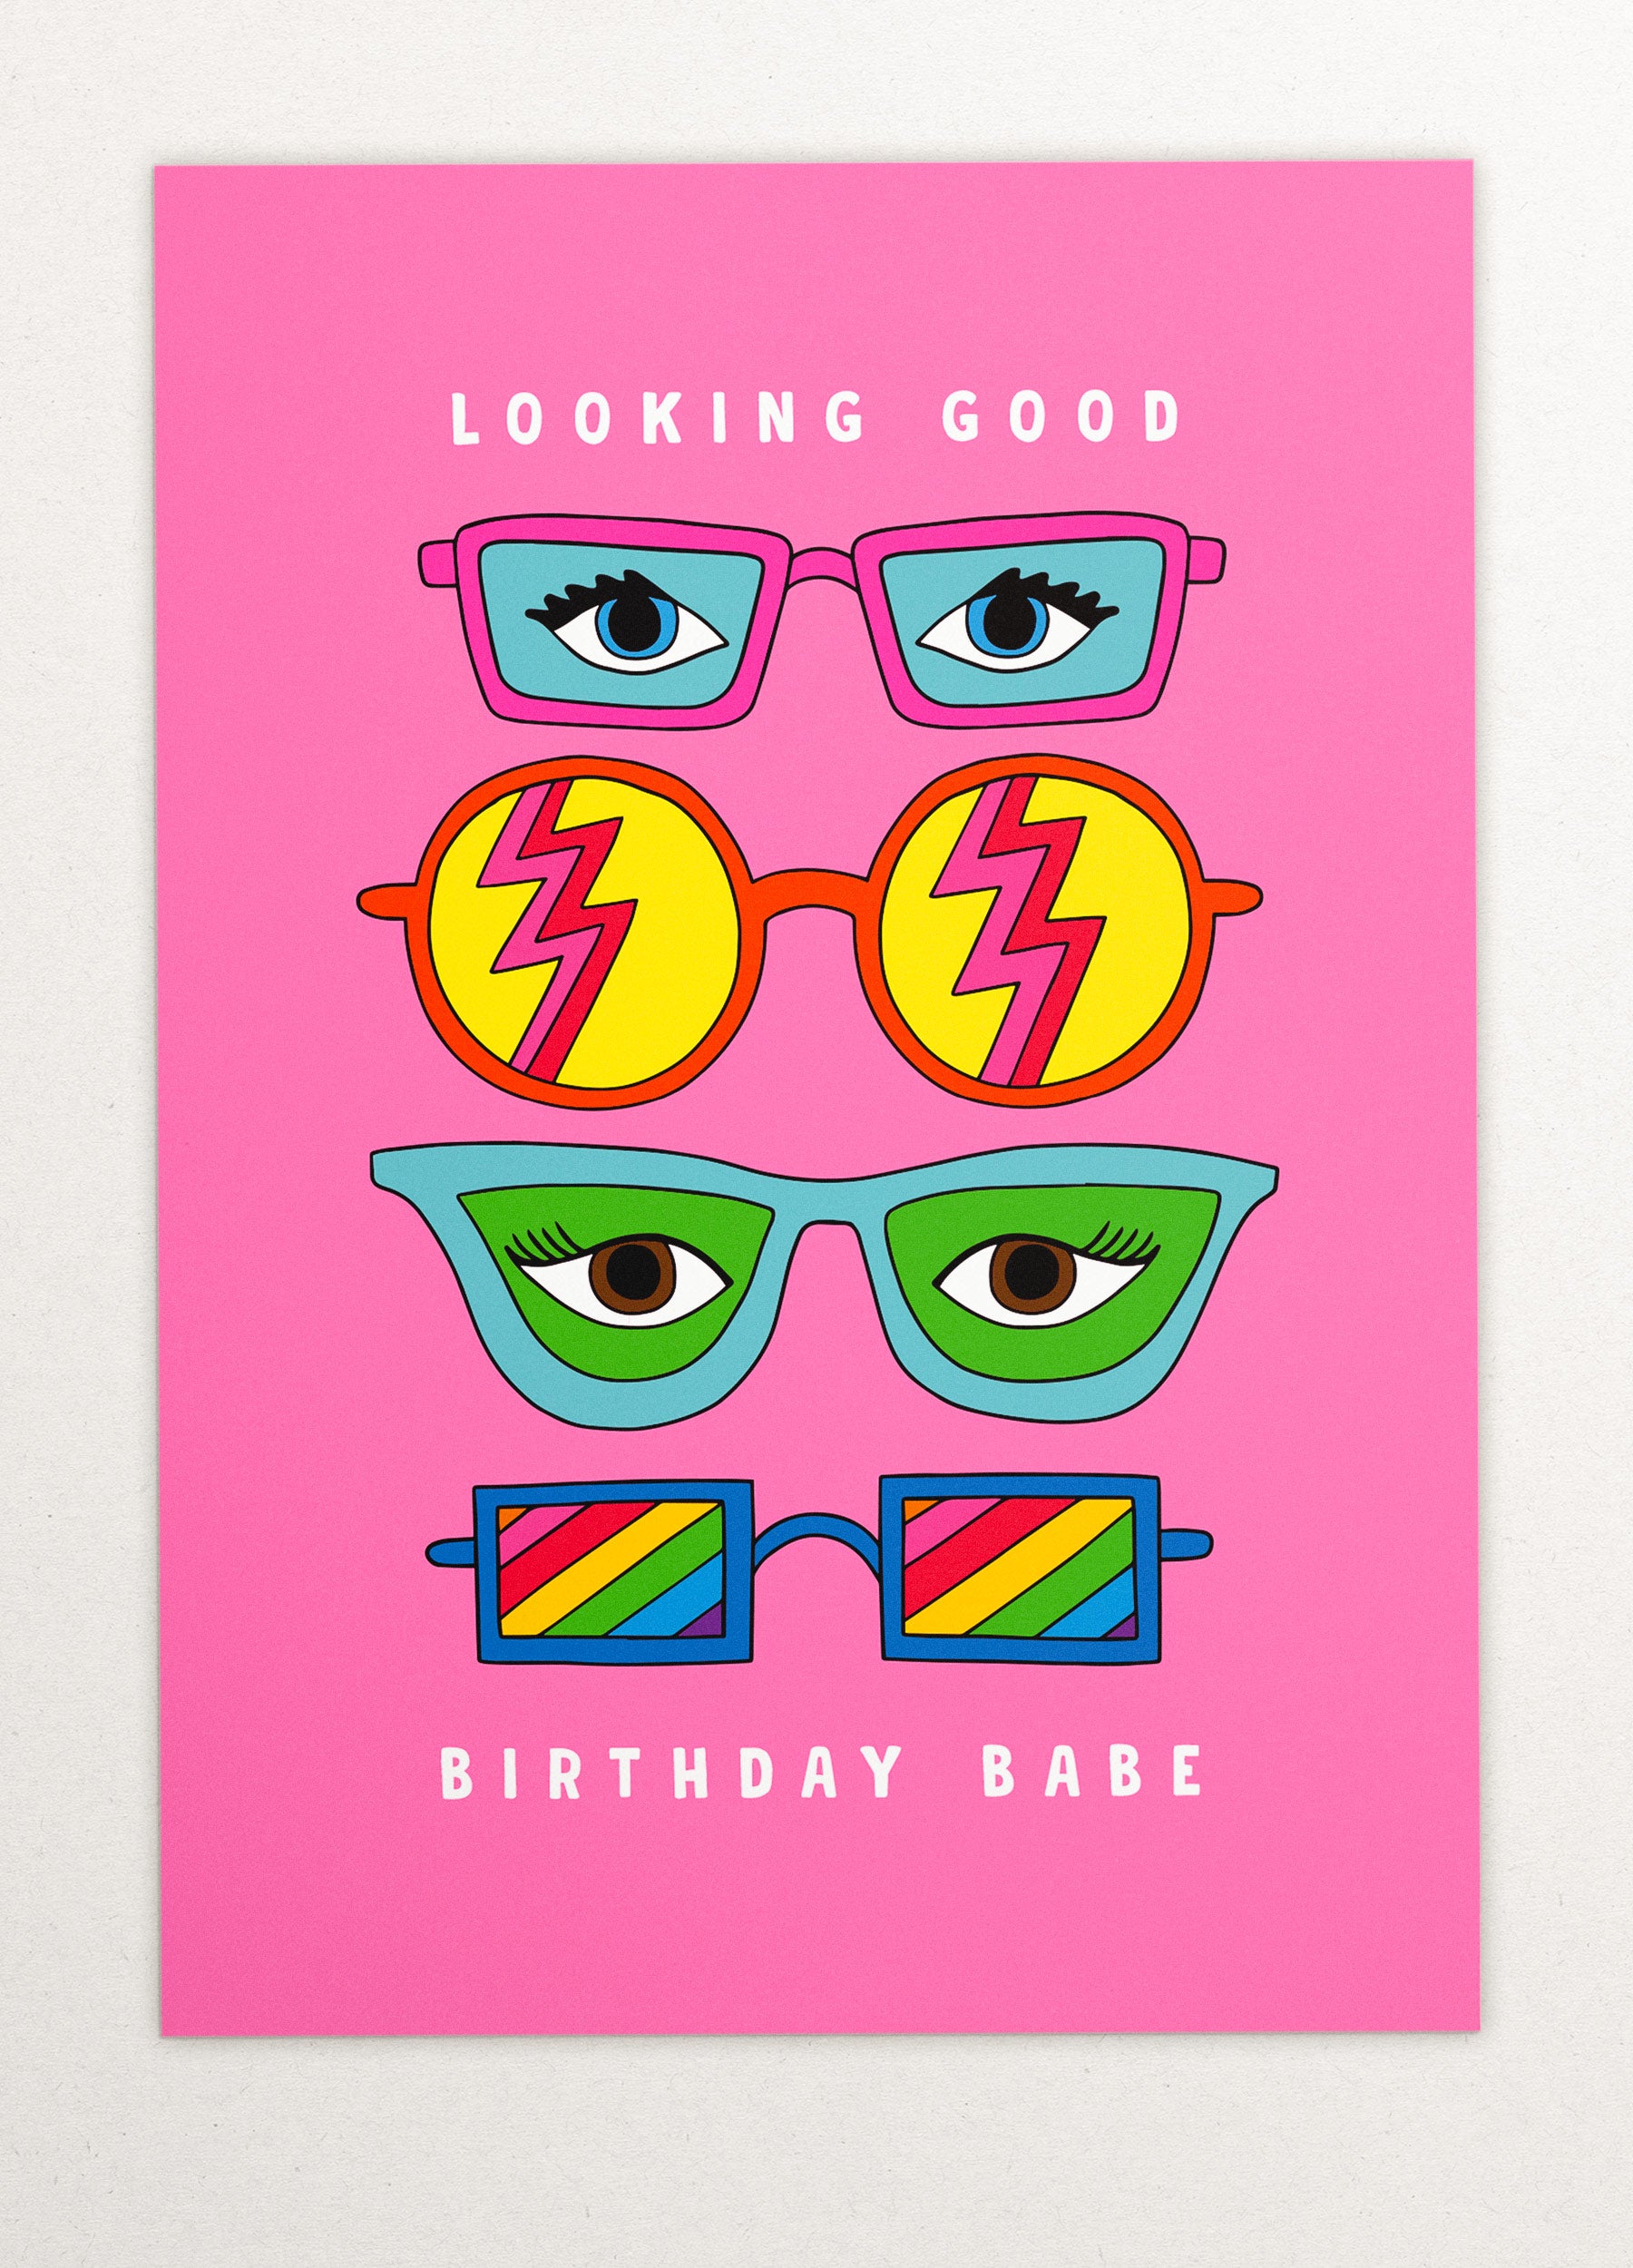 This image is a greeting card by Kiosk that has a pink background. It has three pairs of illustrated glasses on it. The glasses have different shapes, colors, and patterns on the lenses. Above the top pair of glasses is the text “Looking Good”, and below the bottom pair is the text Birthday Babe”. The card has a playful and cheerful design that conveys a message of celebration and compliments for your birthday. 🎂